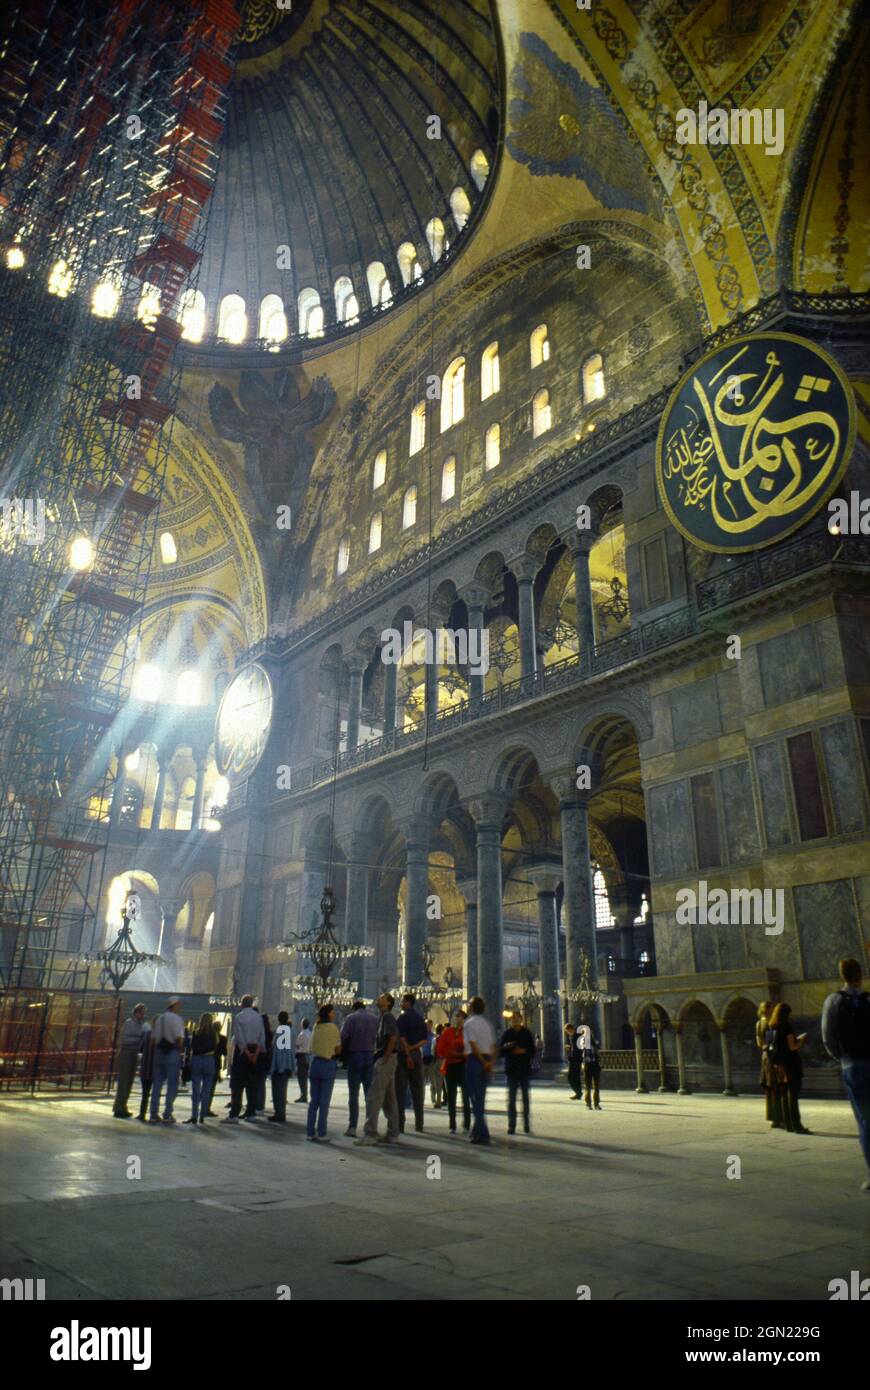 Haghia Sophia, built under Emperor Justinian 532-537 the world’s largest cathedral for a thousand years (superseded by Seville in 1520), It became a m Stock Photo